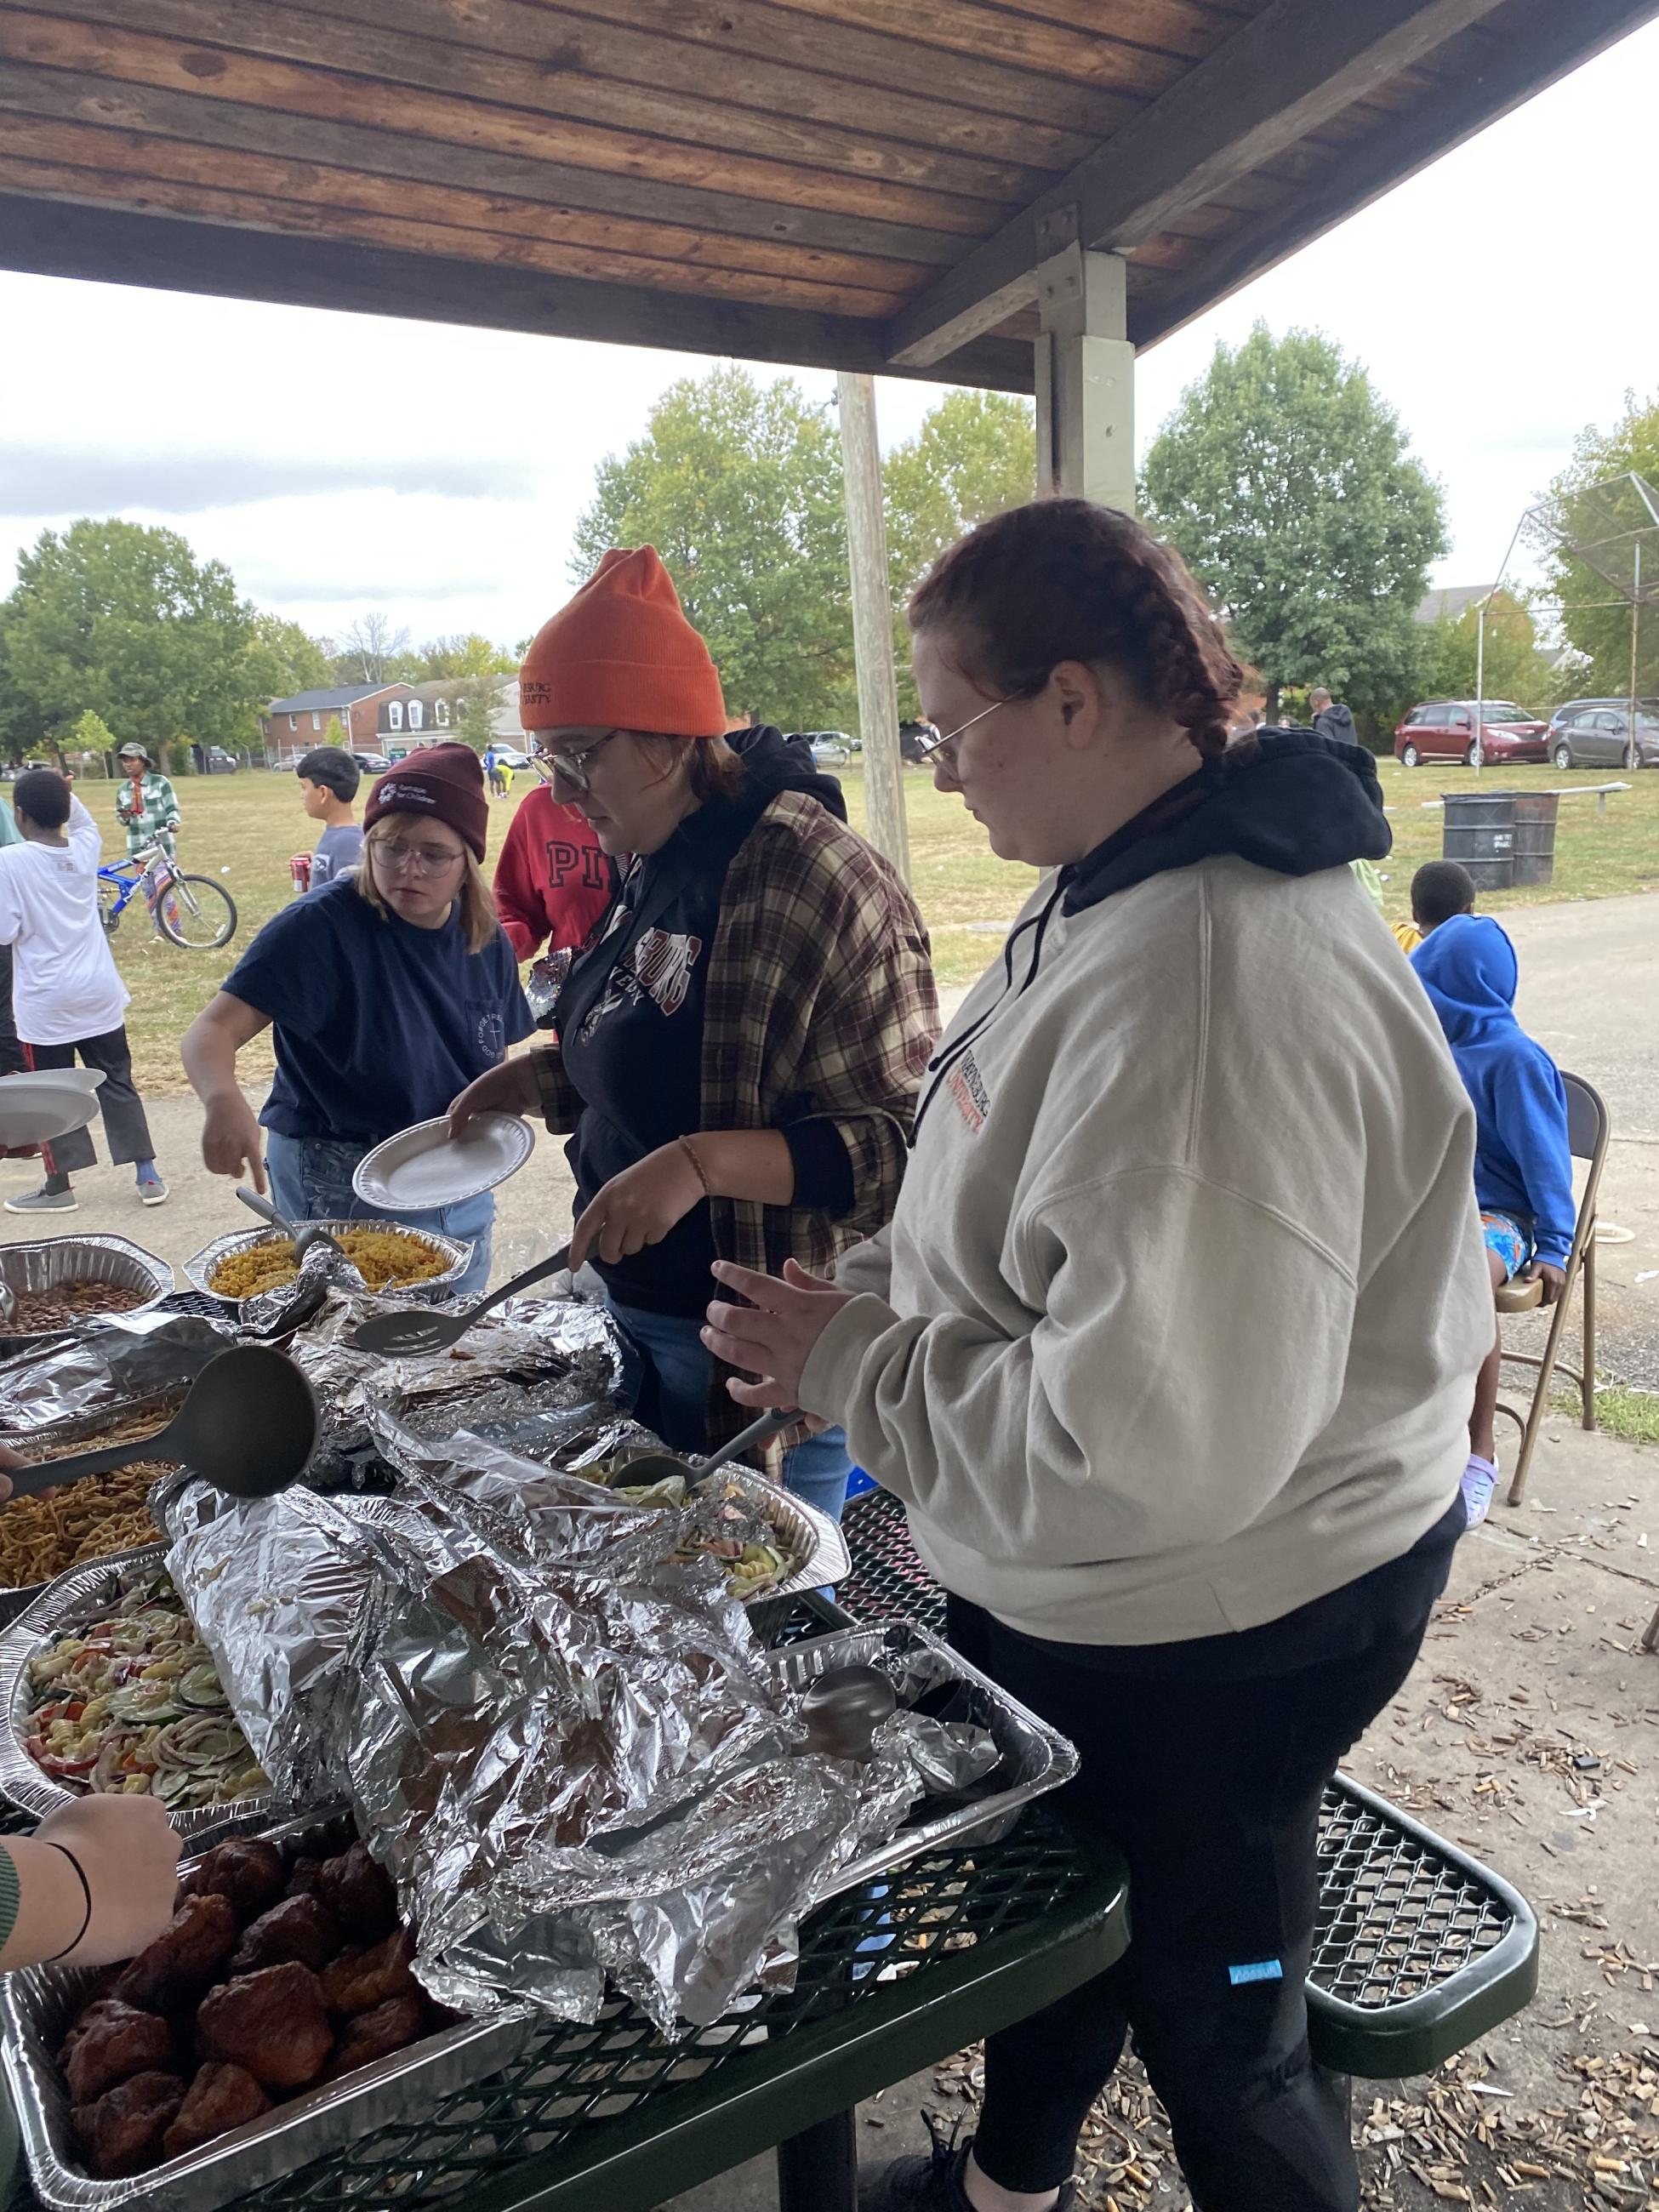 Students serve food at community cookout